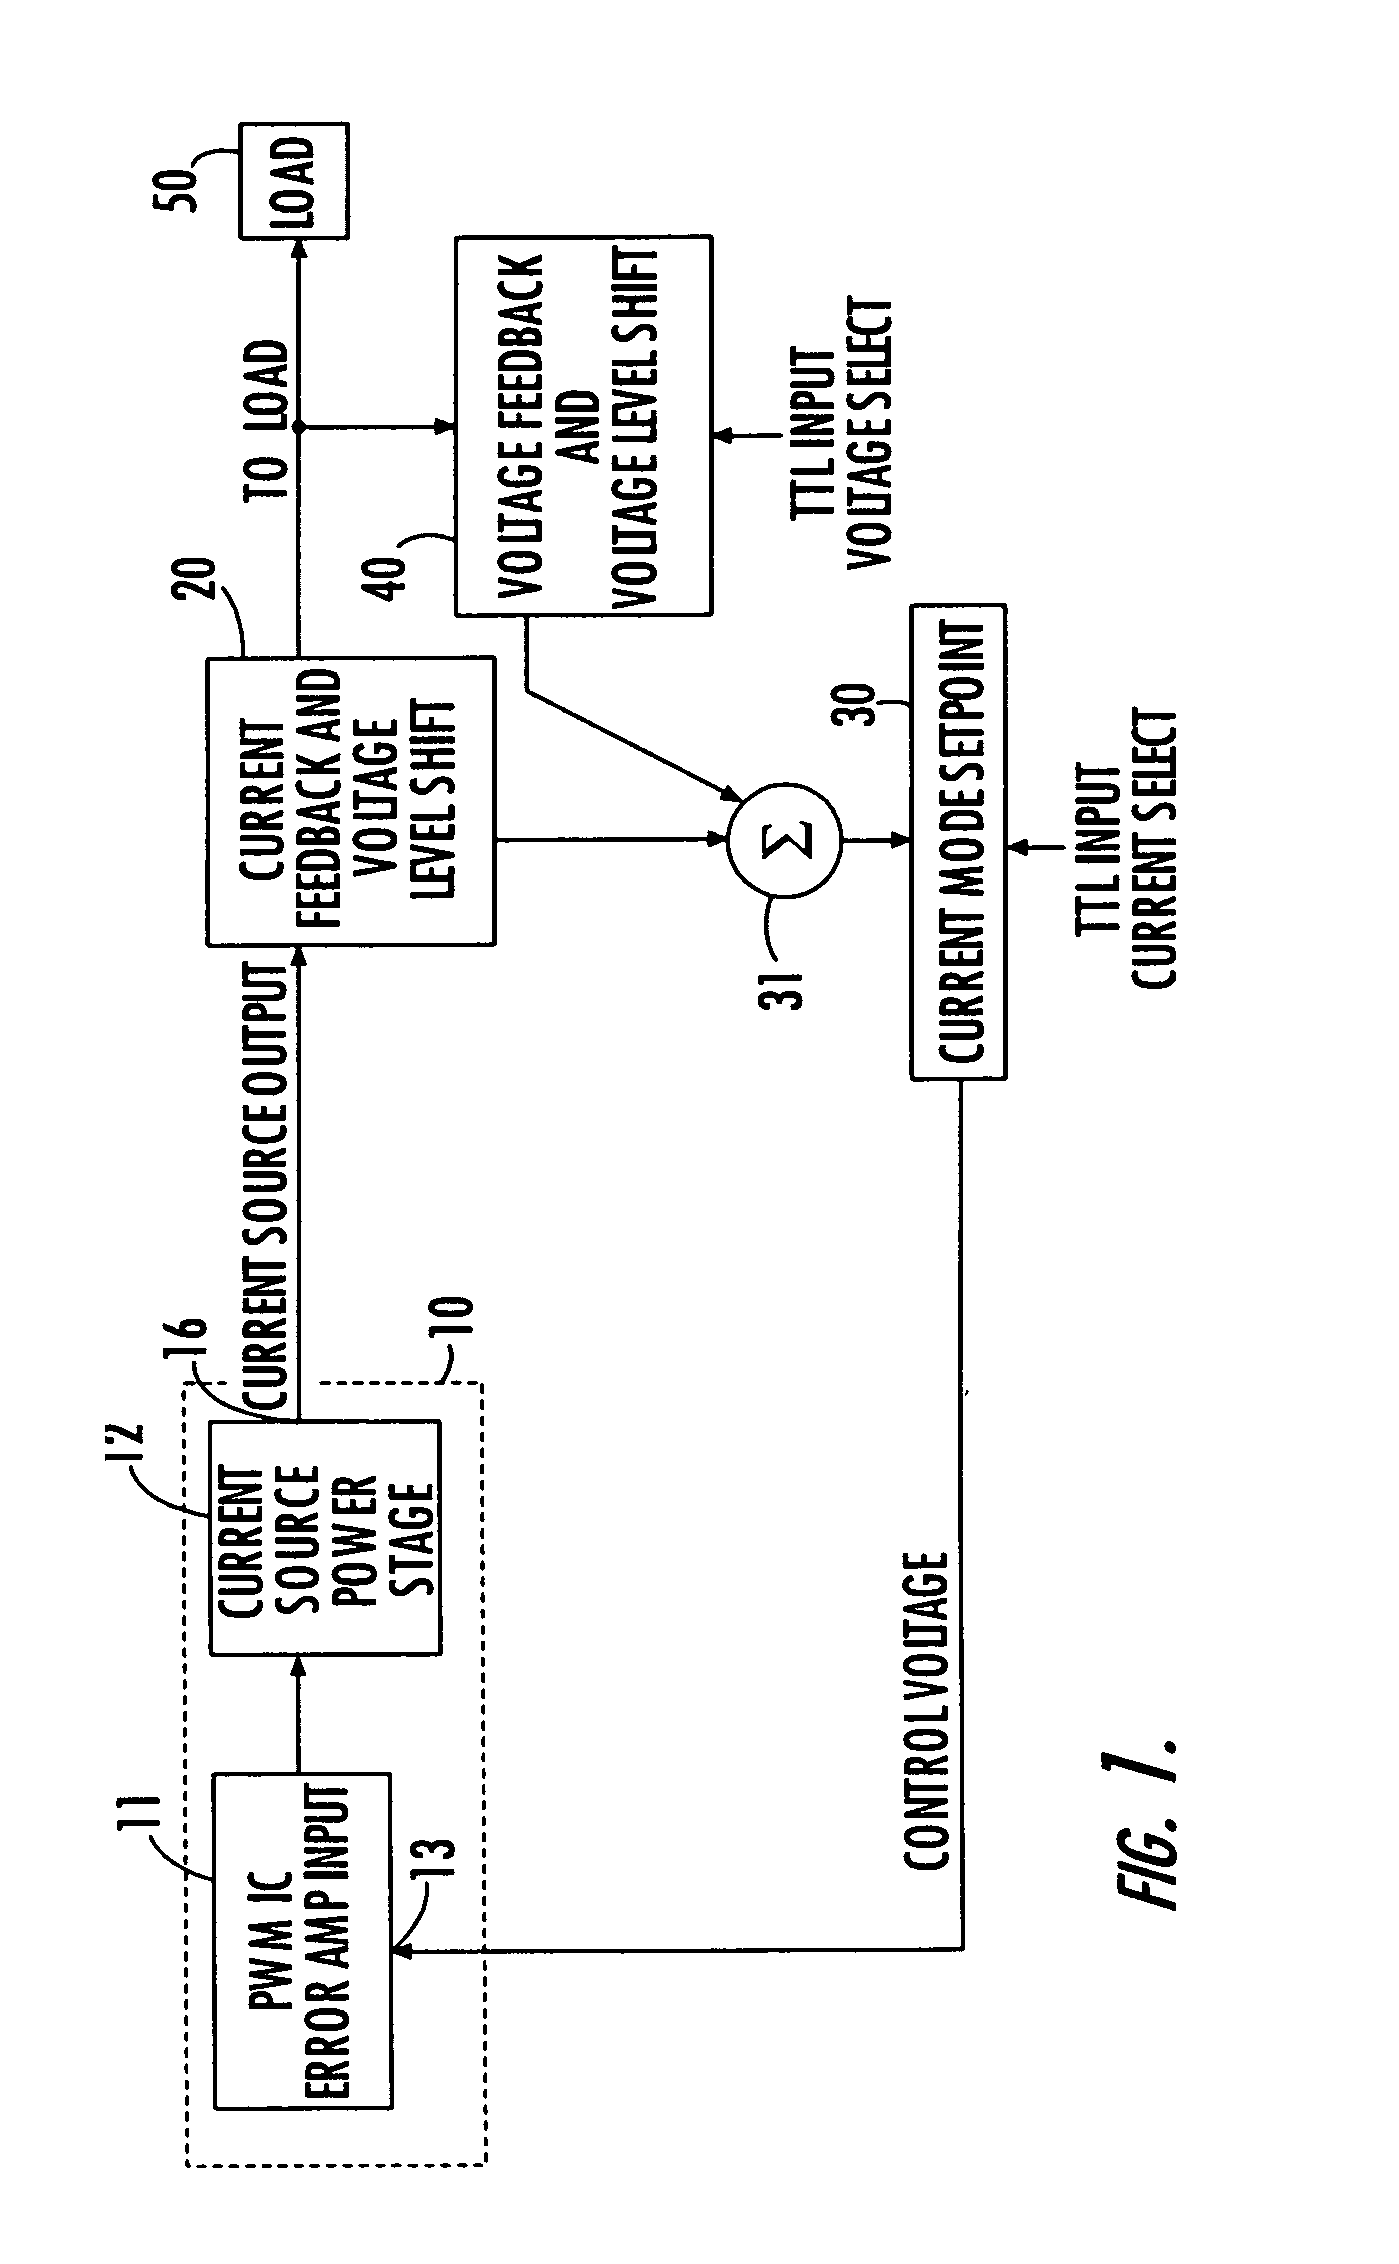 Output current and voltage regulating interface for remote terminal